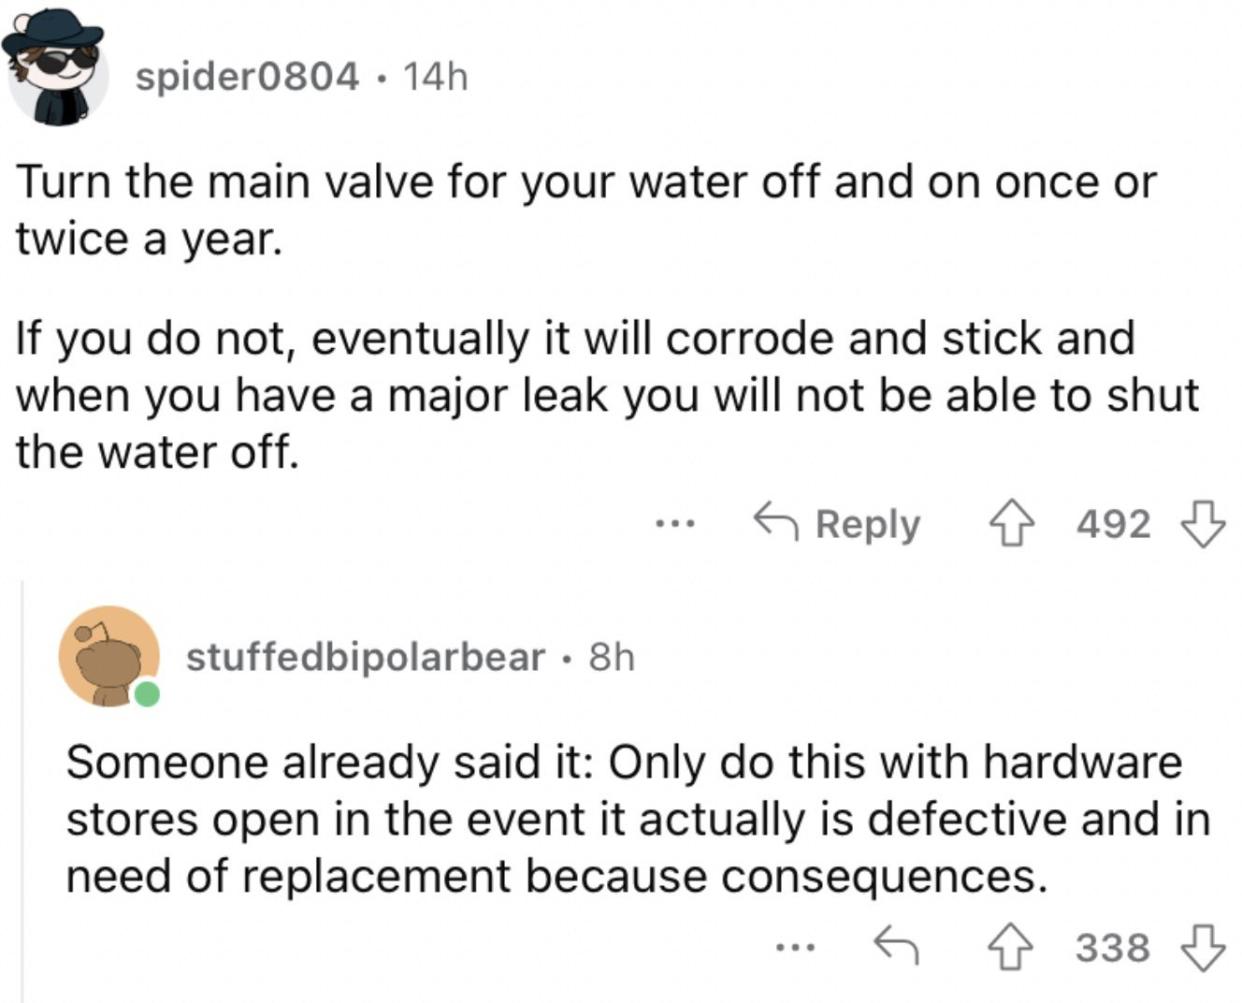 Reddit screenshot about the value of turning the main water valve on and off.